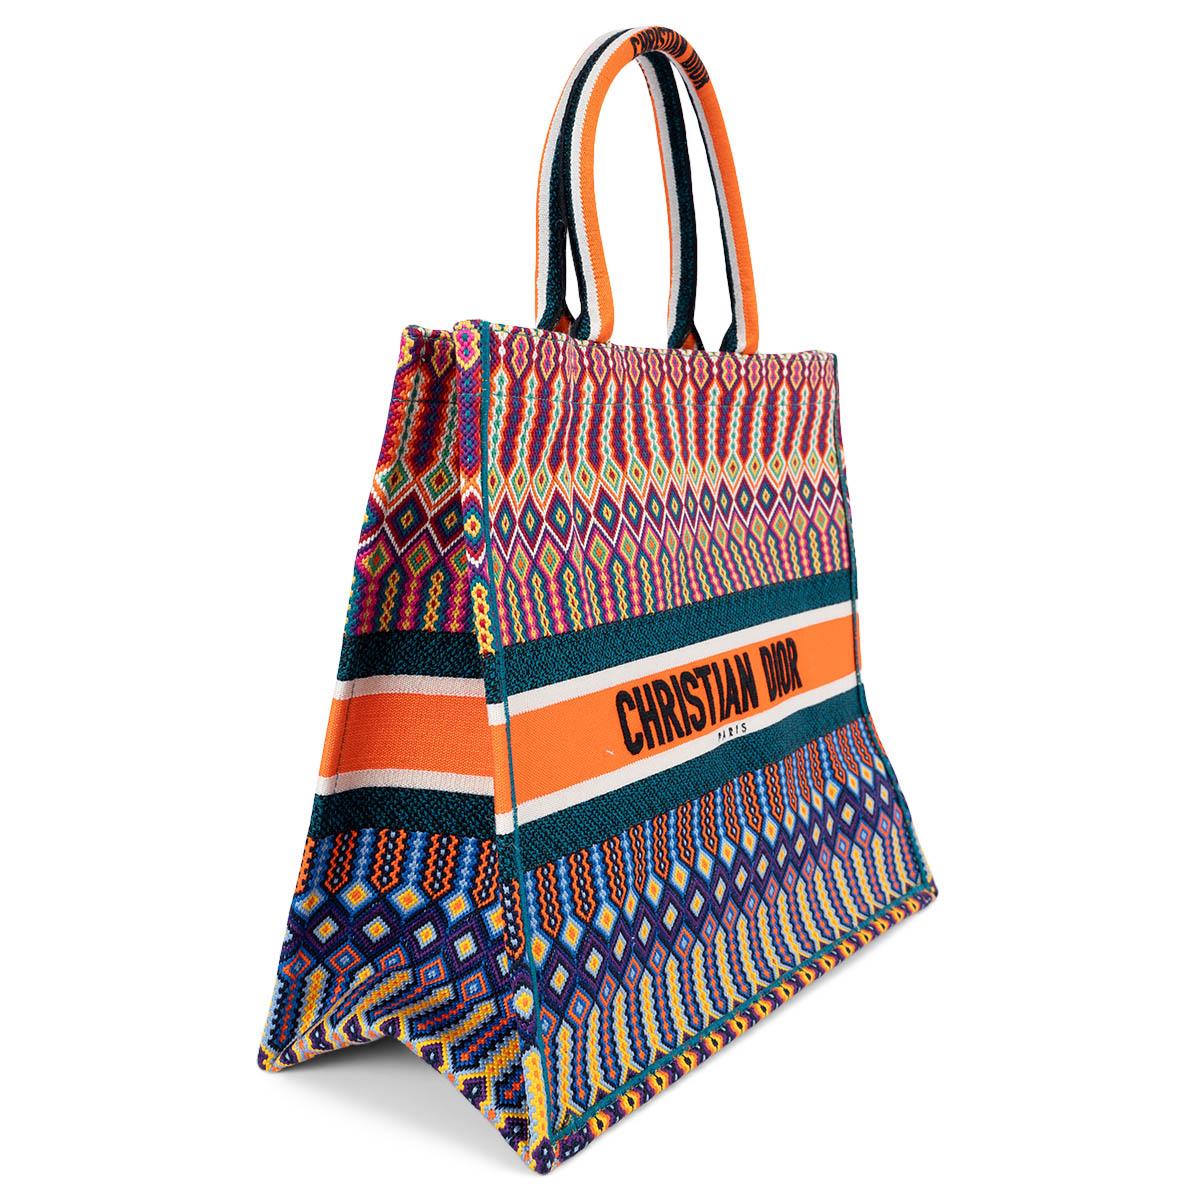 100% authentic Christian Dior Book Tote Large in orange, green, purple, yellow and petrol and pink mexican embroidered canvas. Brand new. Comes with dust bag.  

2018 Spring/Summer

Measurements
Height	35cm (13.7in)
Width	42cm (16.4in)
Depth	18cm